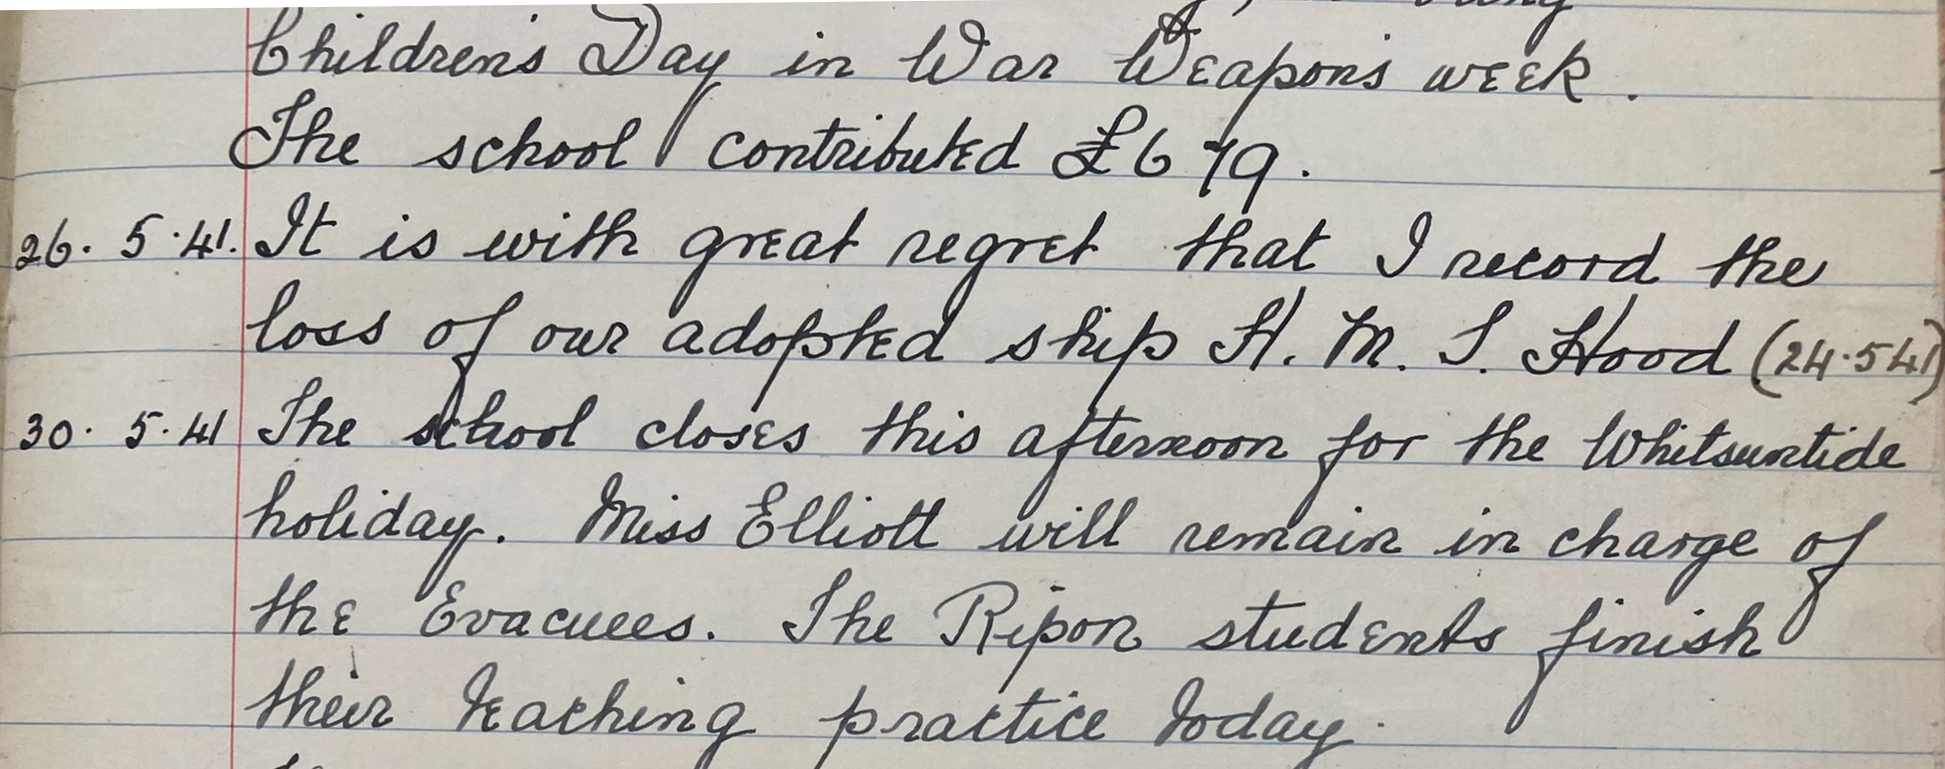 The entry in the school logbook two days after the sinking of HMS Hood in May 1941